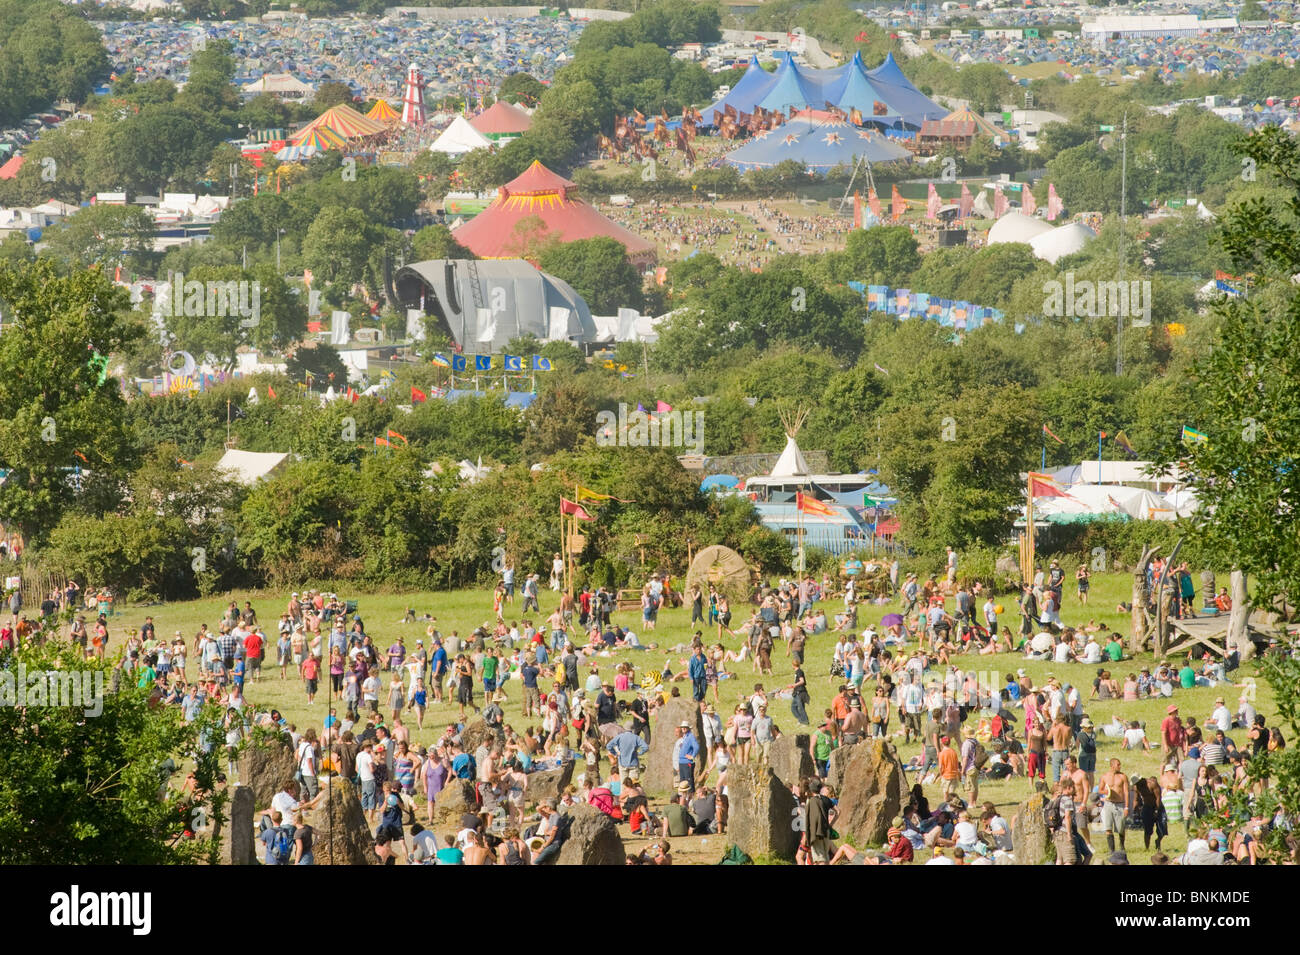 Overview of the Glastonbury Festival site, Somerset, England. Stock Photo